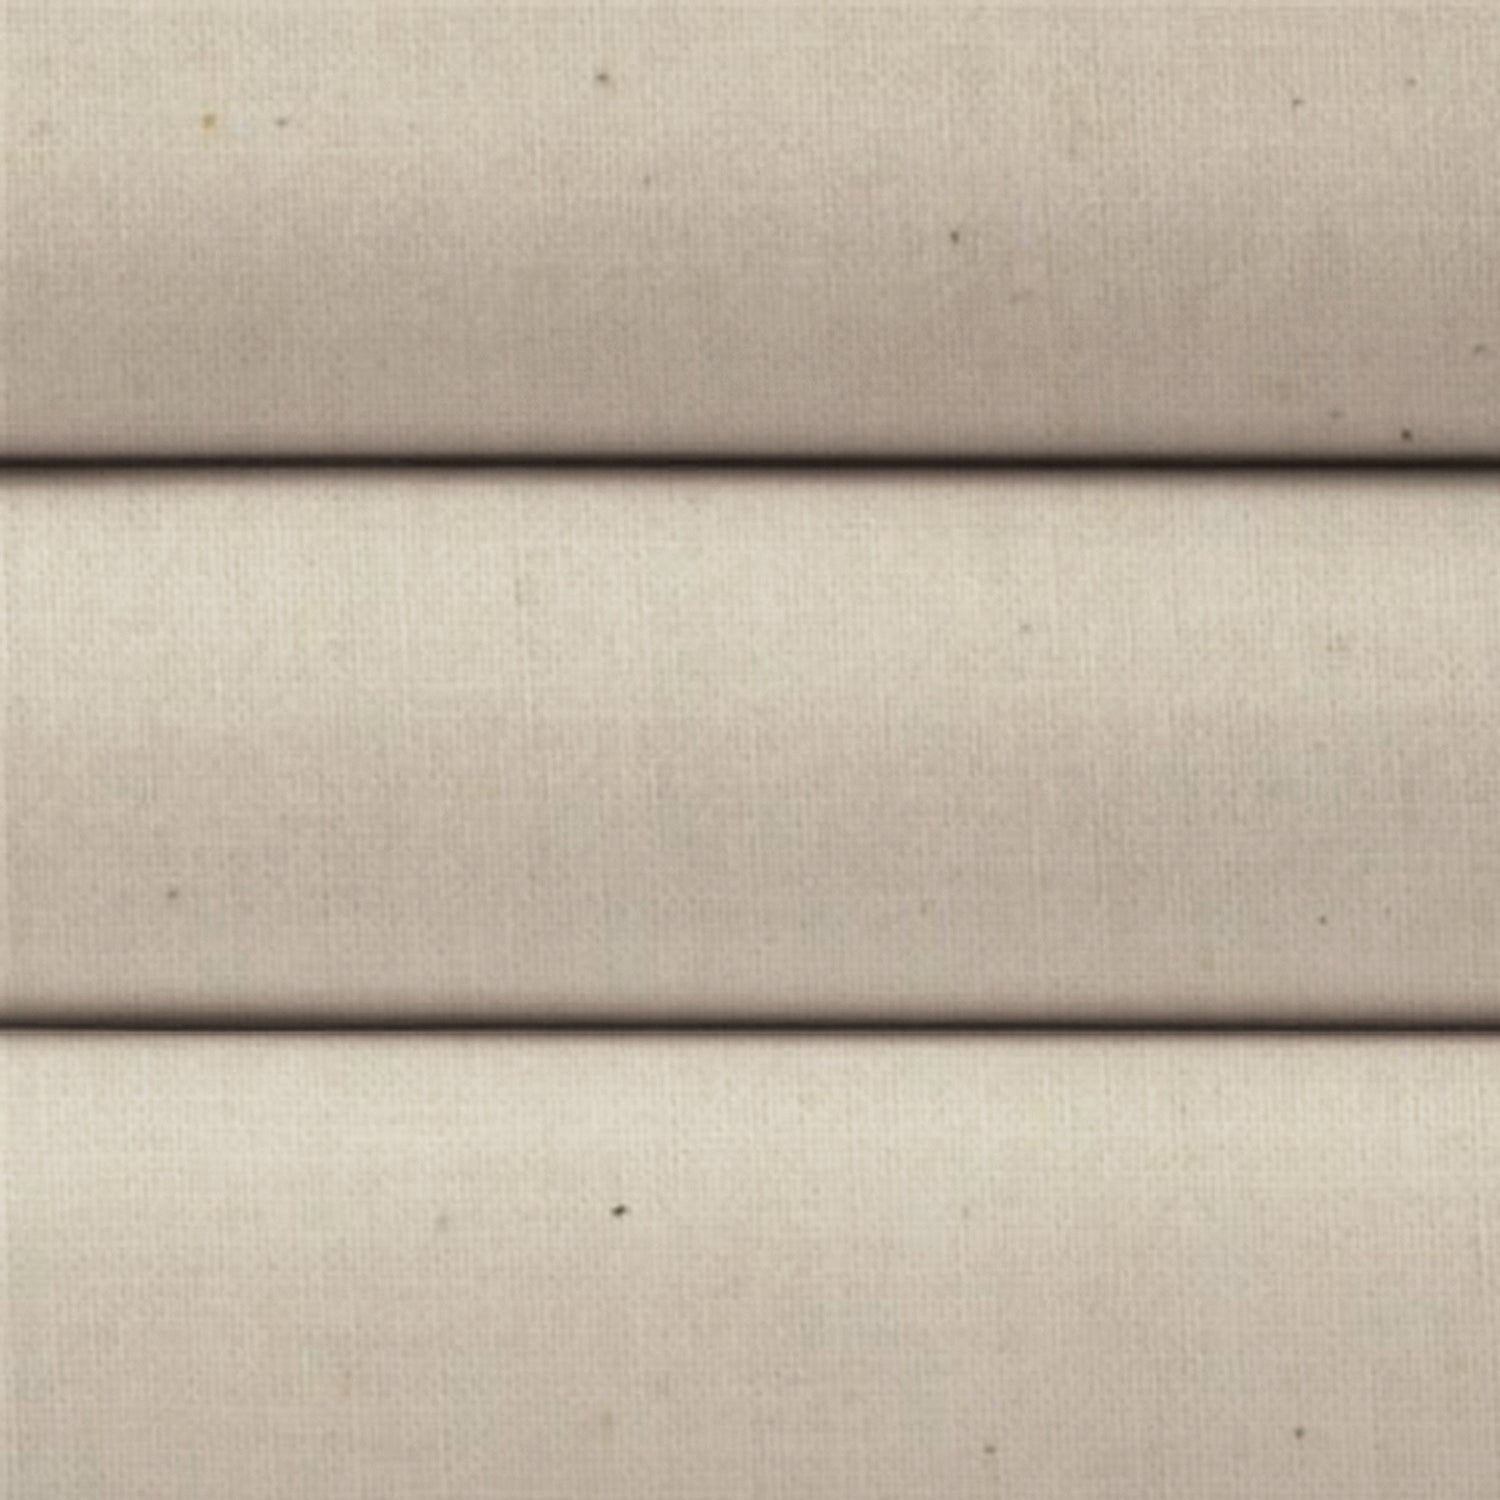 Unbleached Sheeting  63'' -0019A-Greige